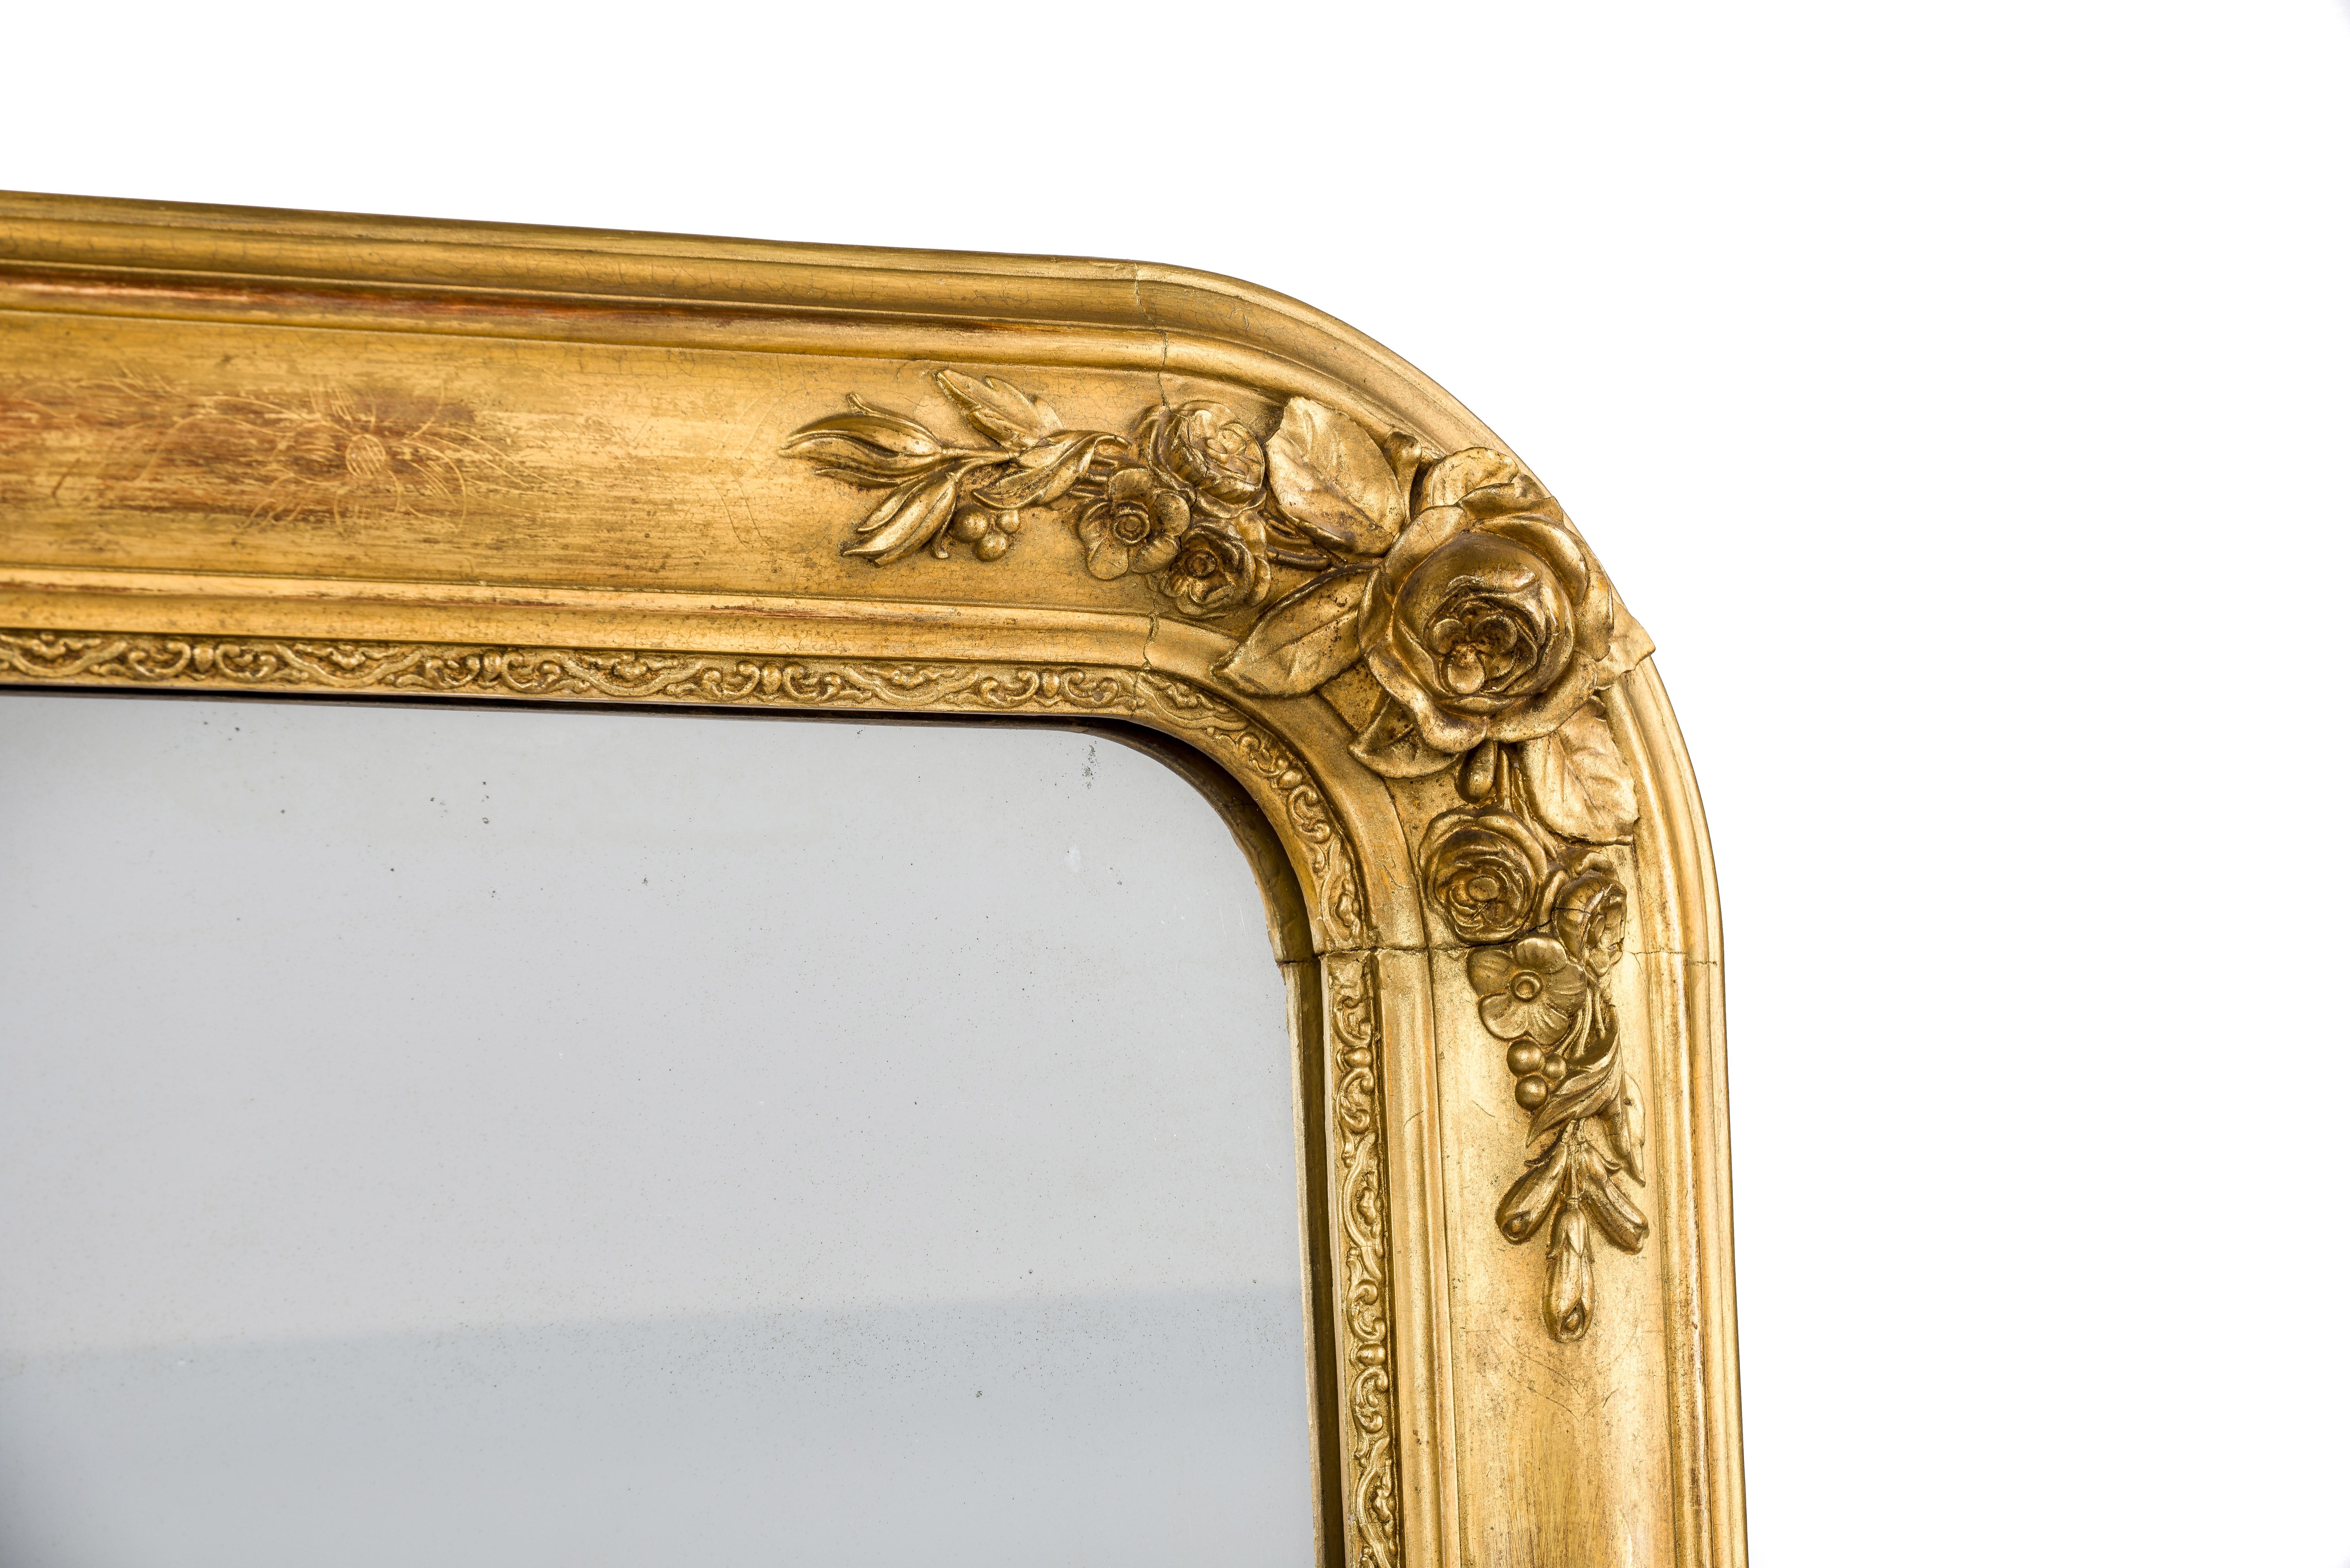 This beautiful antique mirror was made in France in the mid-19th century. It features the upper rounded corners typical for the Louis Philippe style. The mirror has a solid pine frame that was smoothened with gesso. The most elevated part was